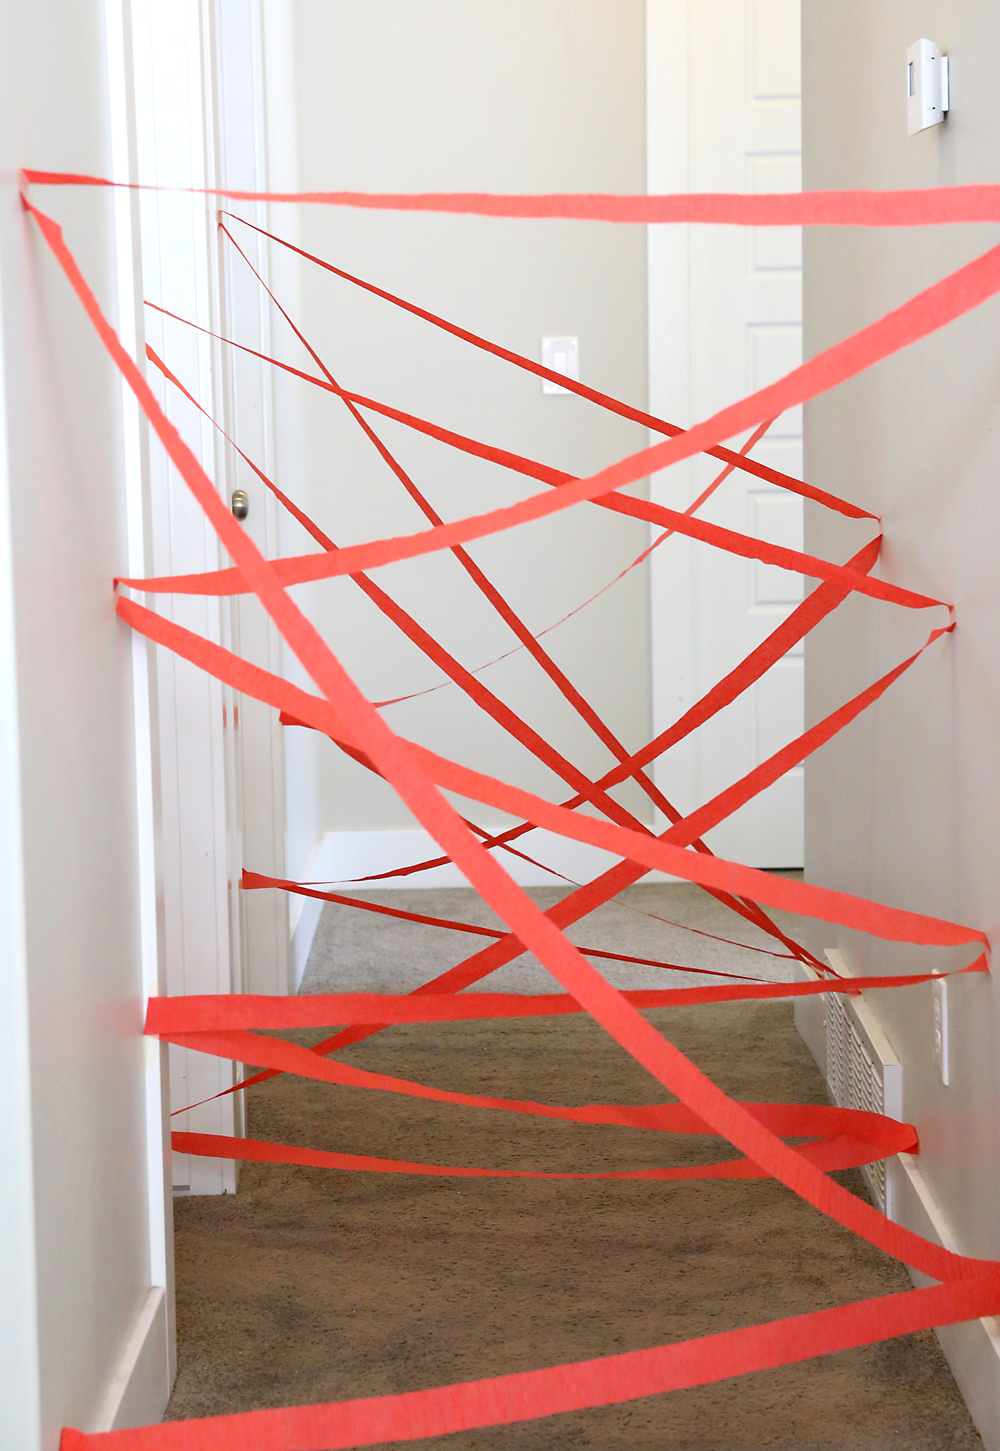 Make a hallway laser maze! Easy, inexpensive indoor activity for kids that's super fun! Perfect for kids who love playing superhero or spy - and fun for birthday parties, too.